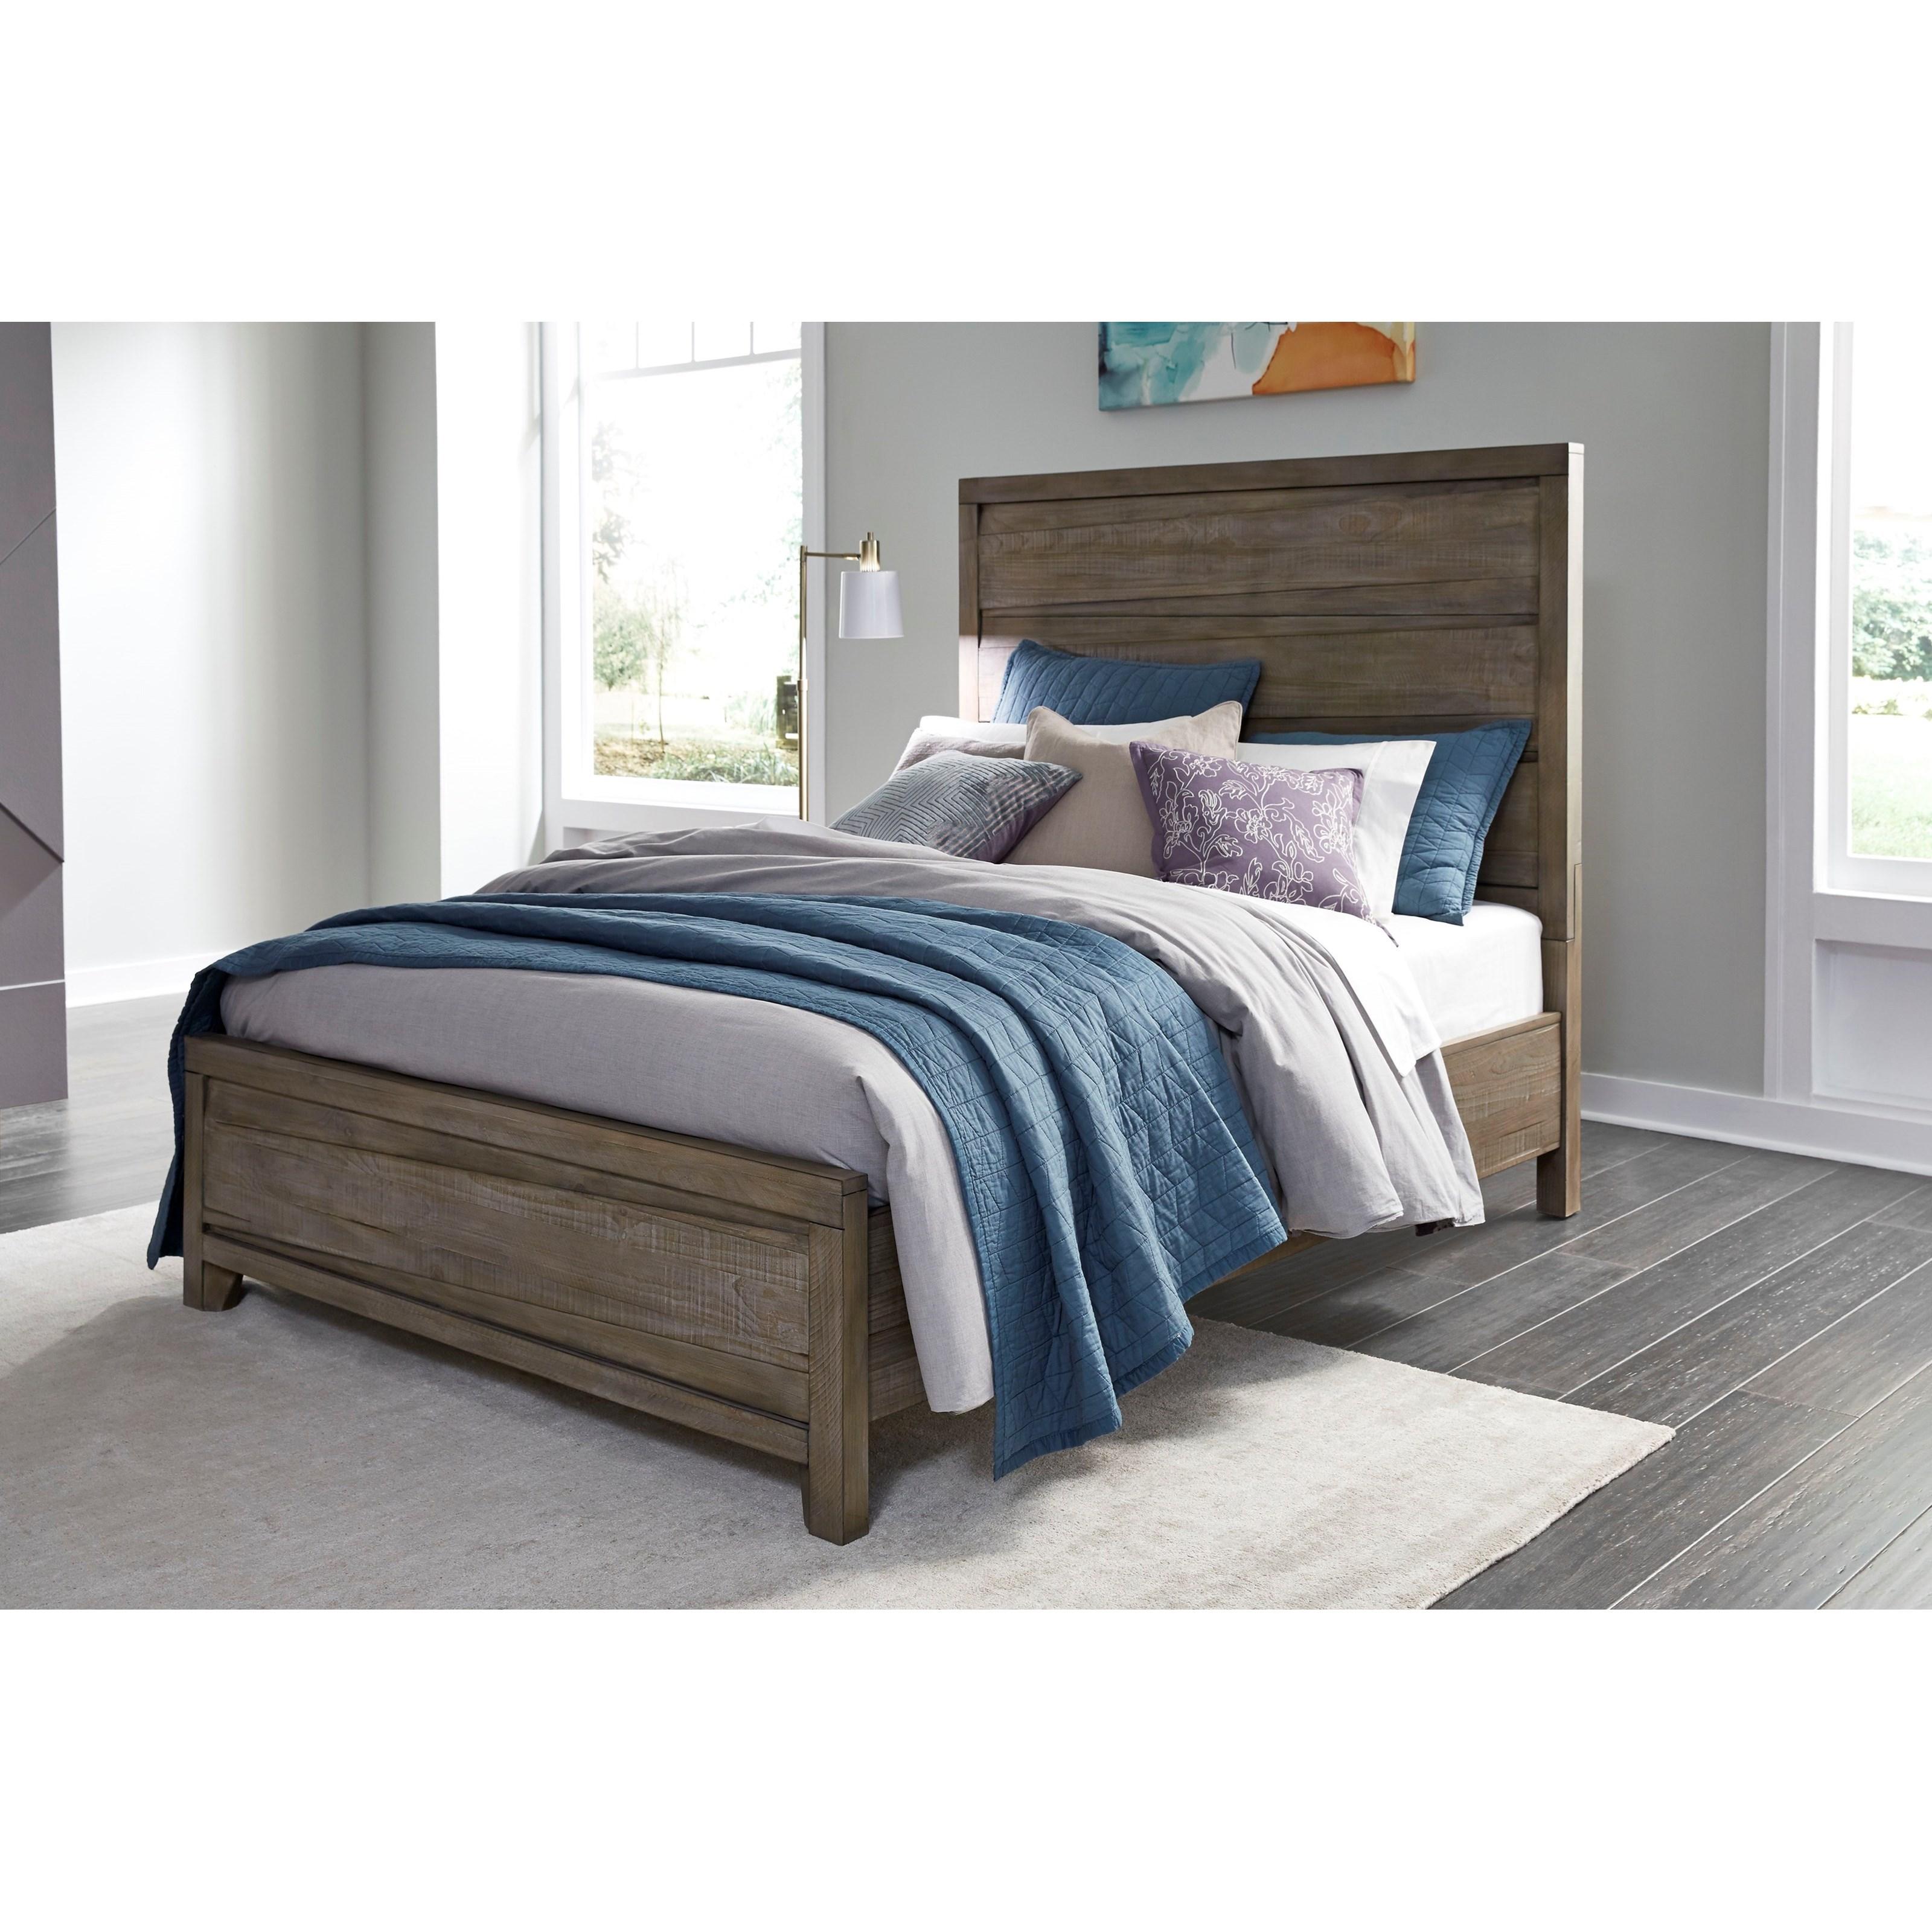 Casual, Rustic Panel Bed HEARST 6VF3A4 in Tan 